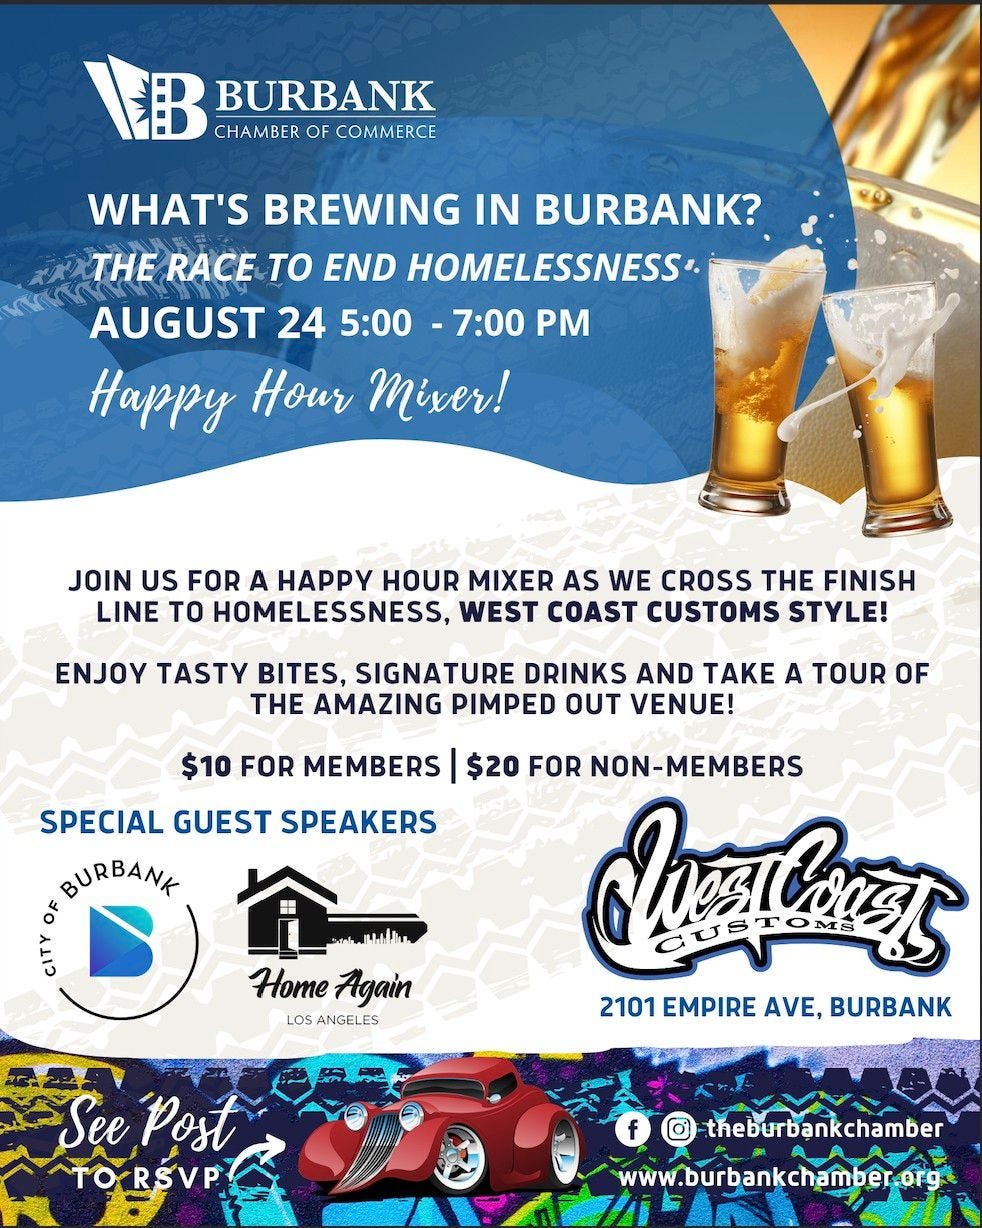 May be an image of text that says 'BURBANK CHAMBER OF COMMERCE WHAT'S BREWING IN BURBANK? THE RACE To END HOMELESSNESS AUGUST 24 5:00 7:00 PM Happy Hour Mixer! JOIN US FOR A HAPPY HOUR MIXER AS WE CROSS THE FINISH LINE TO HOMELESSNESS, WEST COAST CUSTOMS STYLE! ENJOY TASTY BITES, SIGNATURE DRINKS AND TAKE A TOUR OF THE AMAZING PIMPED OUT VENUE! $10 FOR MEMBERS SPECIAL GUEST SPEAKERS BURBANK ኢዚለው Home Again LOS ANGELES $20 FOR NON-MEMBERS IvπOEL 2101 EMPIRE AVE, BURBANK See Post TORSVP f theburbankchamber www.burbankchamber.org'